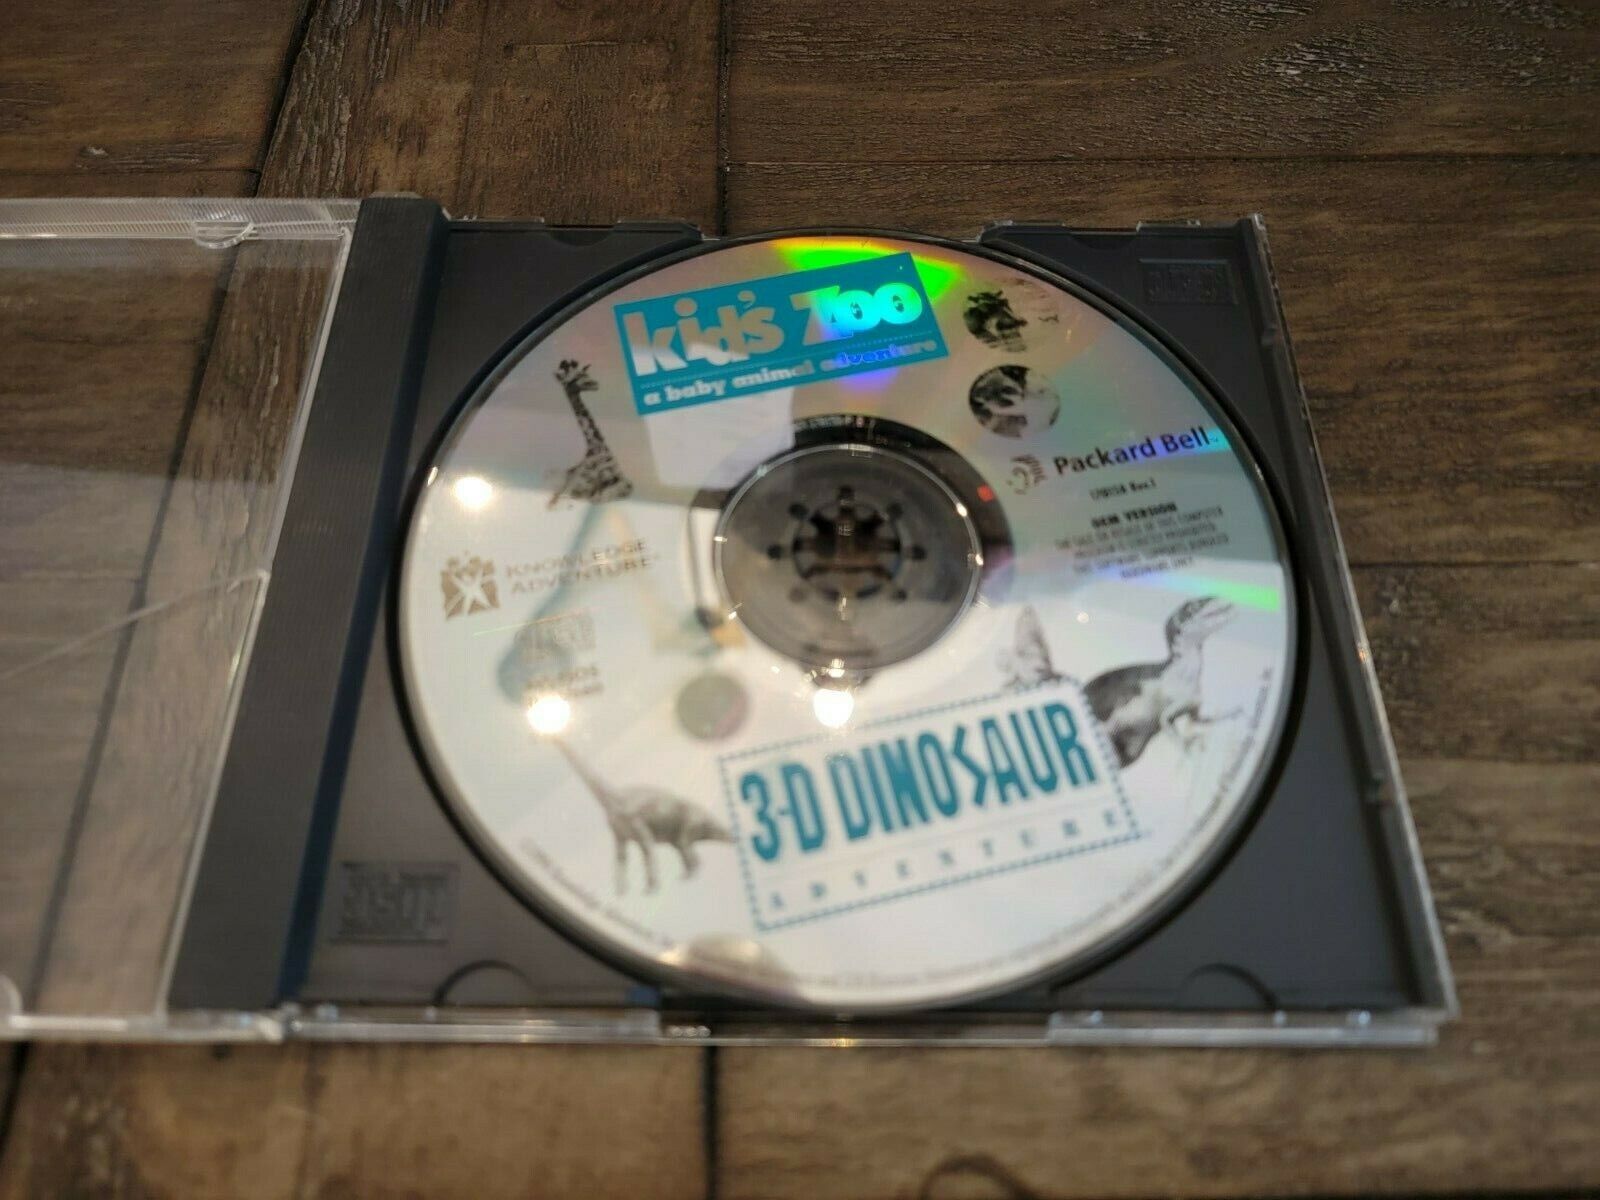 kids zoo a baby animal adventure and 3-d dinosaur adventure 1994 VINTAGE PC Game